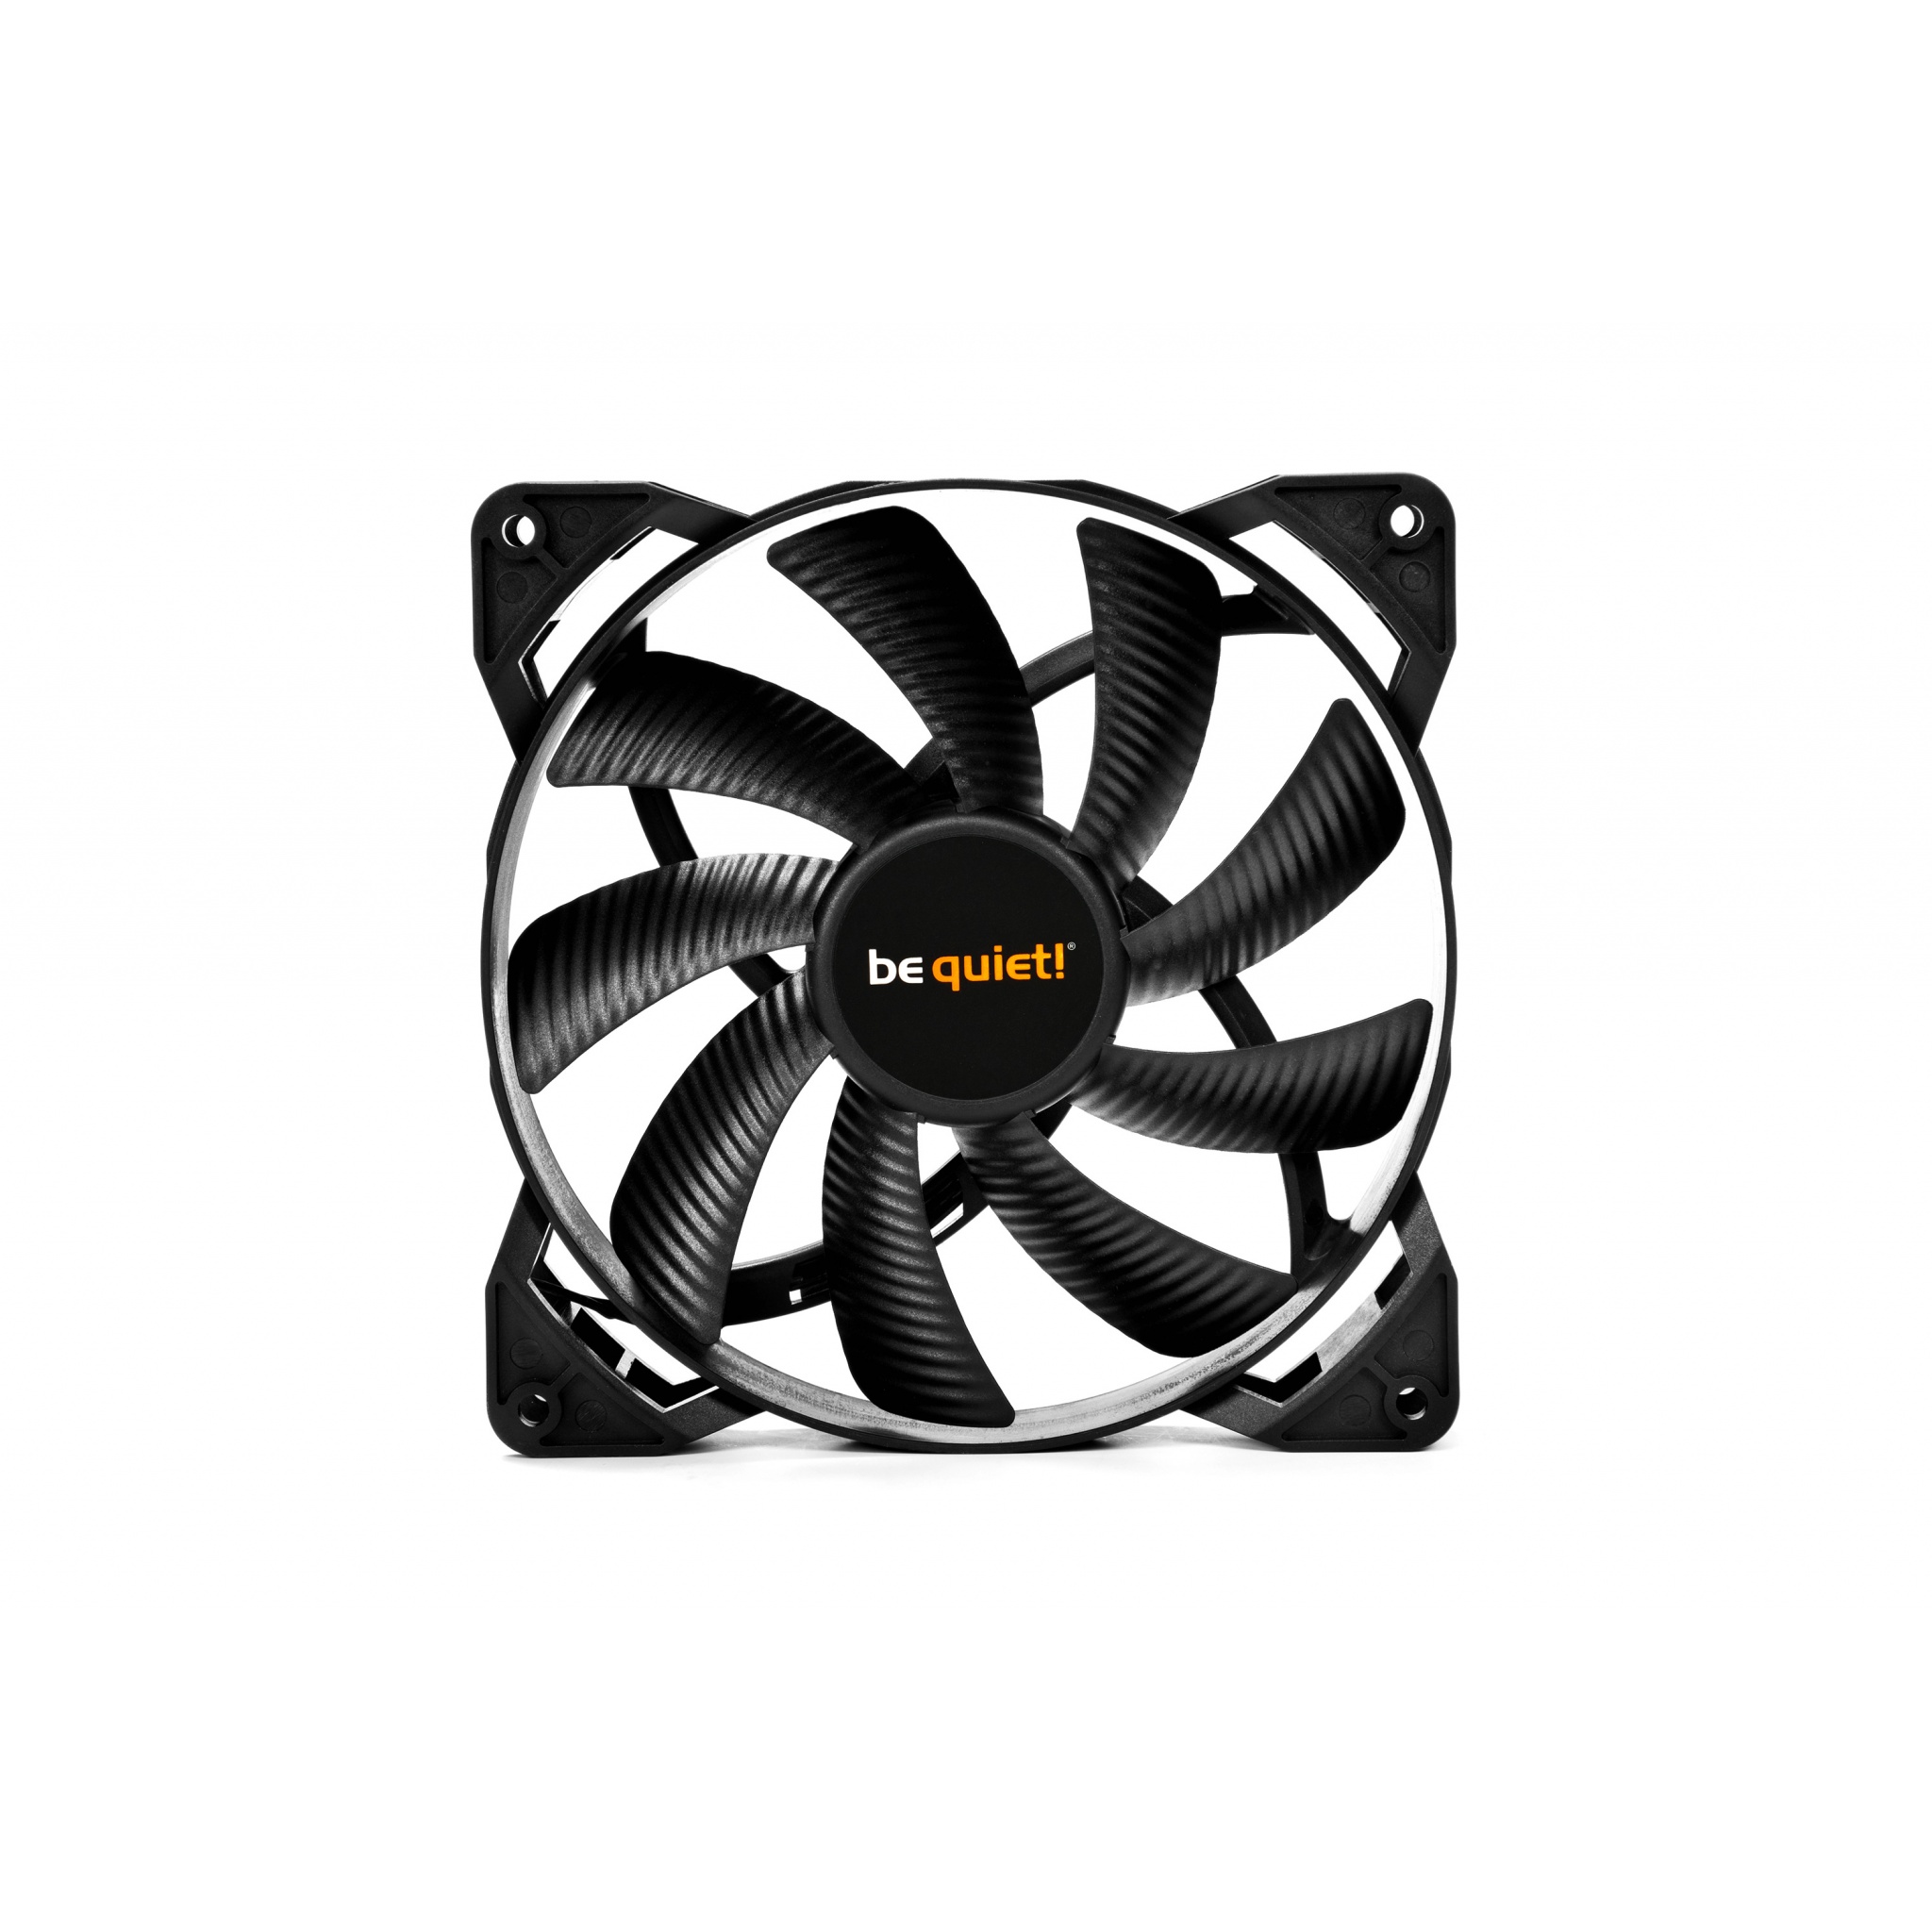 be quiet! Pure Wings 2 PWM 140mm Computer Case Fan